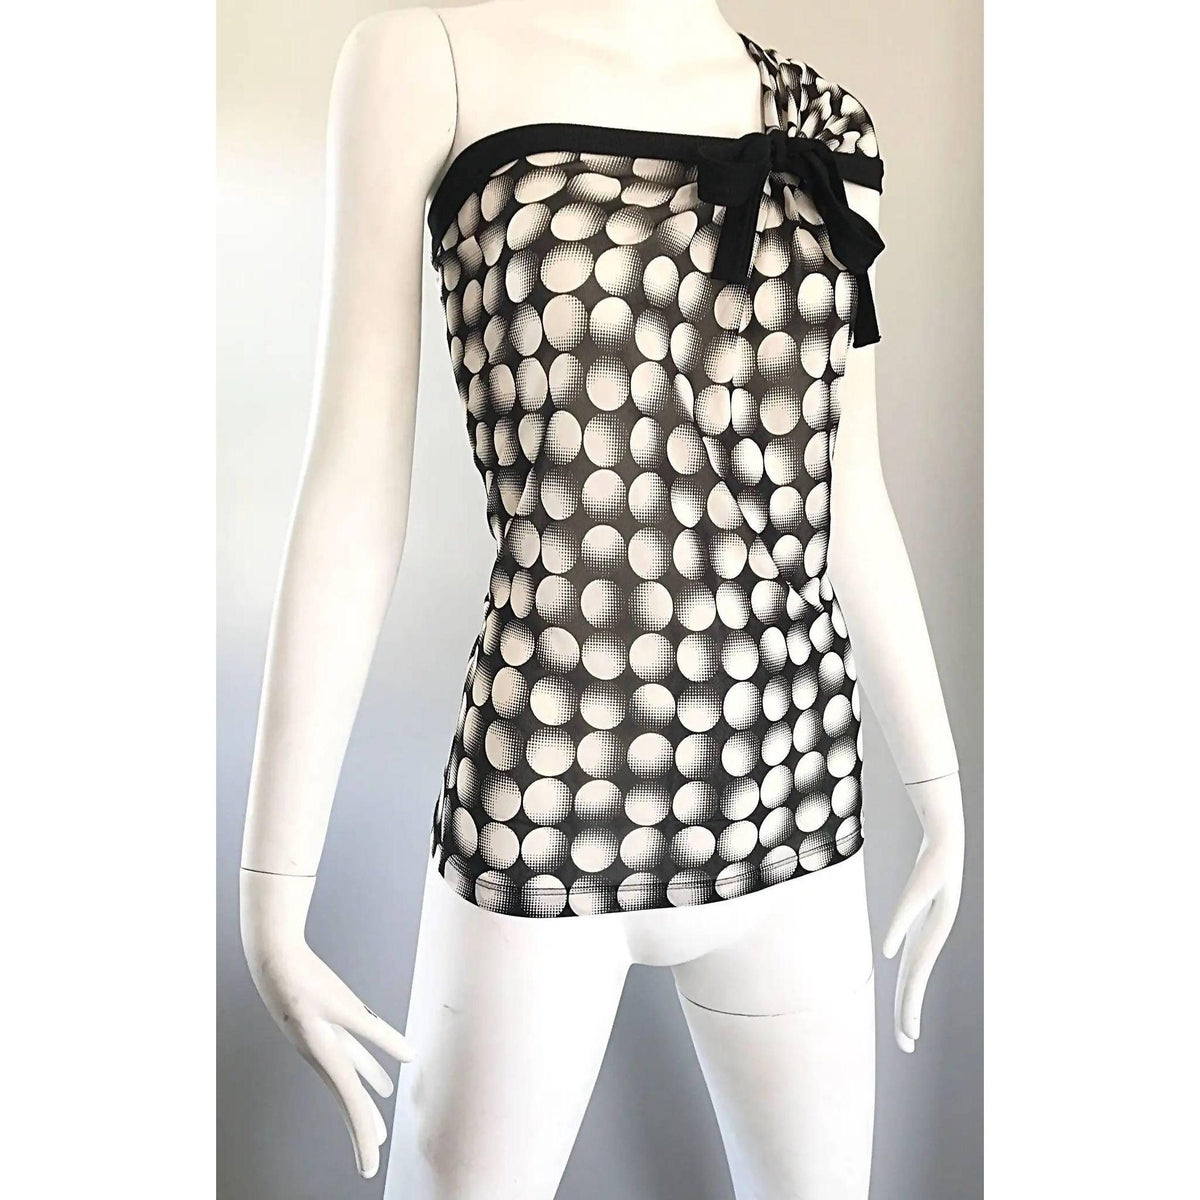 Pre-Owned JEAN PAUL GAULTIER New One Shoulder Black & White Op Art Top - theREMODA